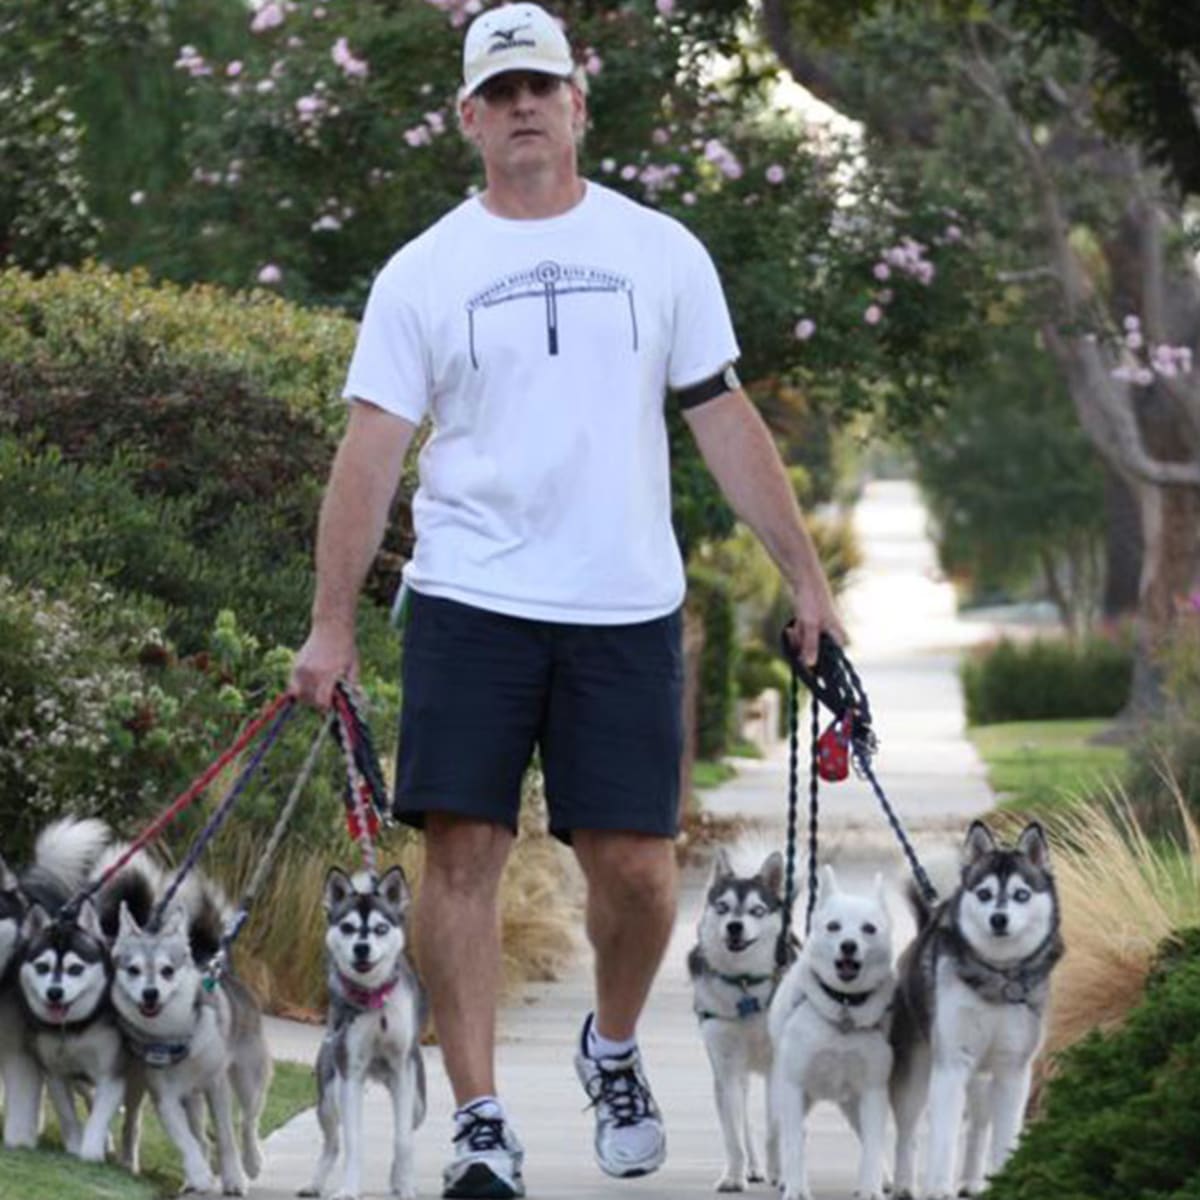 Bill Belichick's dog created a surge in demand - Sports Illustrated